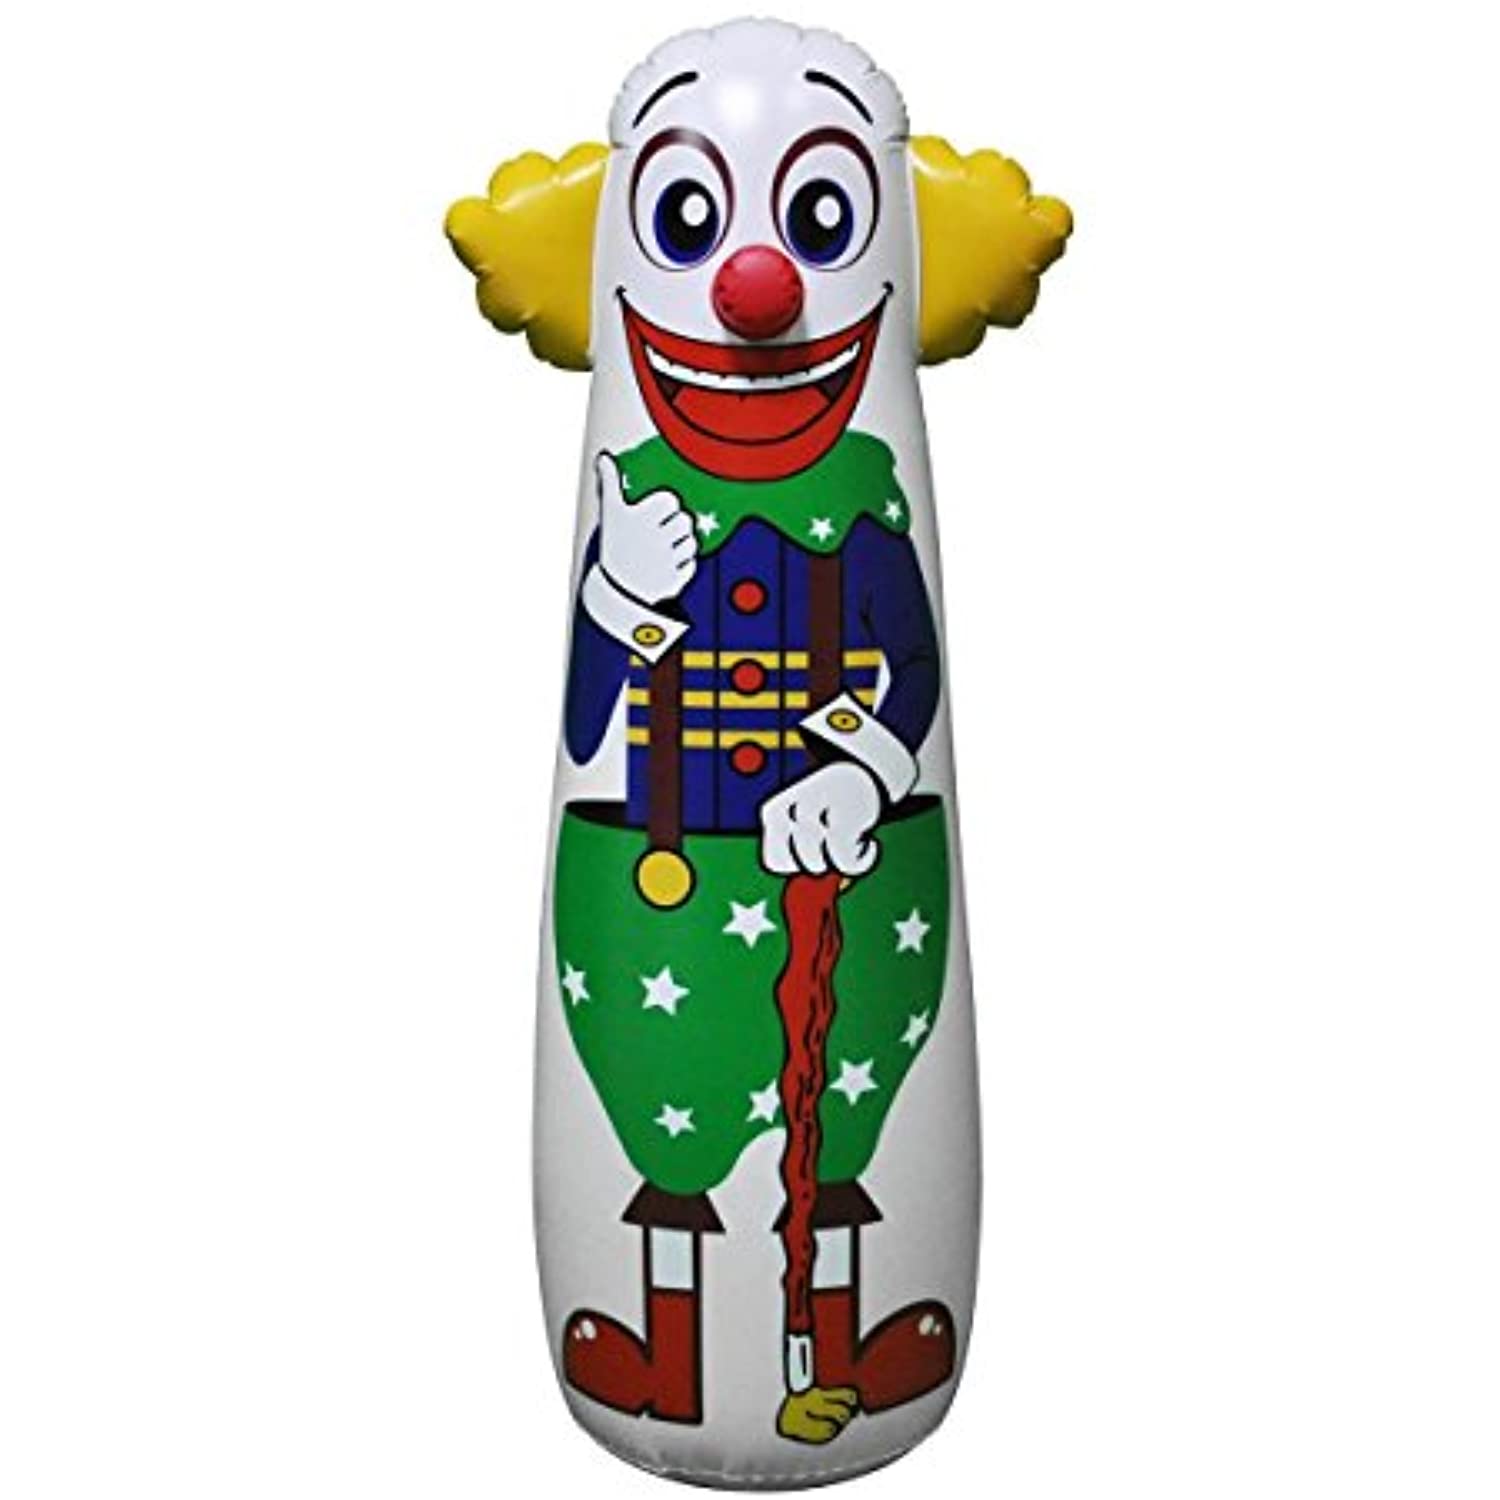 Inflatable Clown Punching Bag (Set of 2) Size: 42"